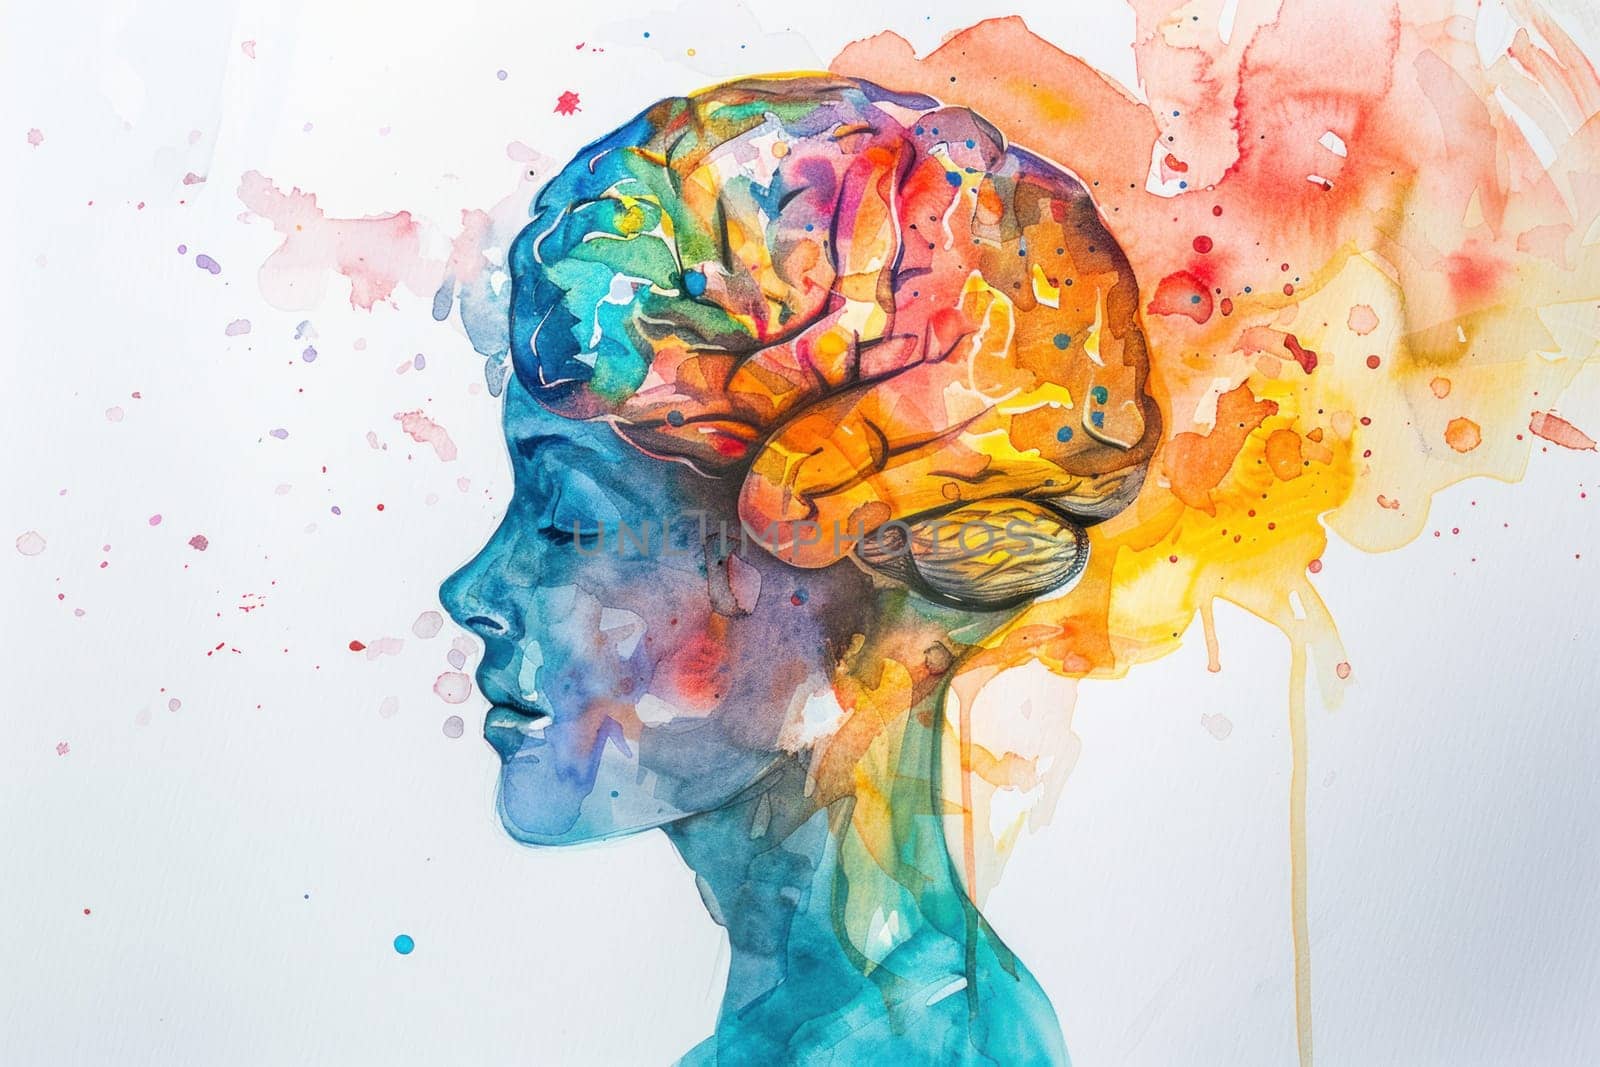 Watercolor painting of a woman's head with brain in center, exploring the intersection of beauty and science